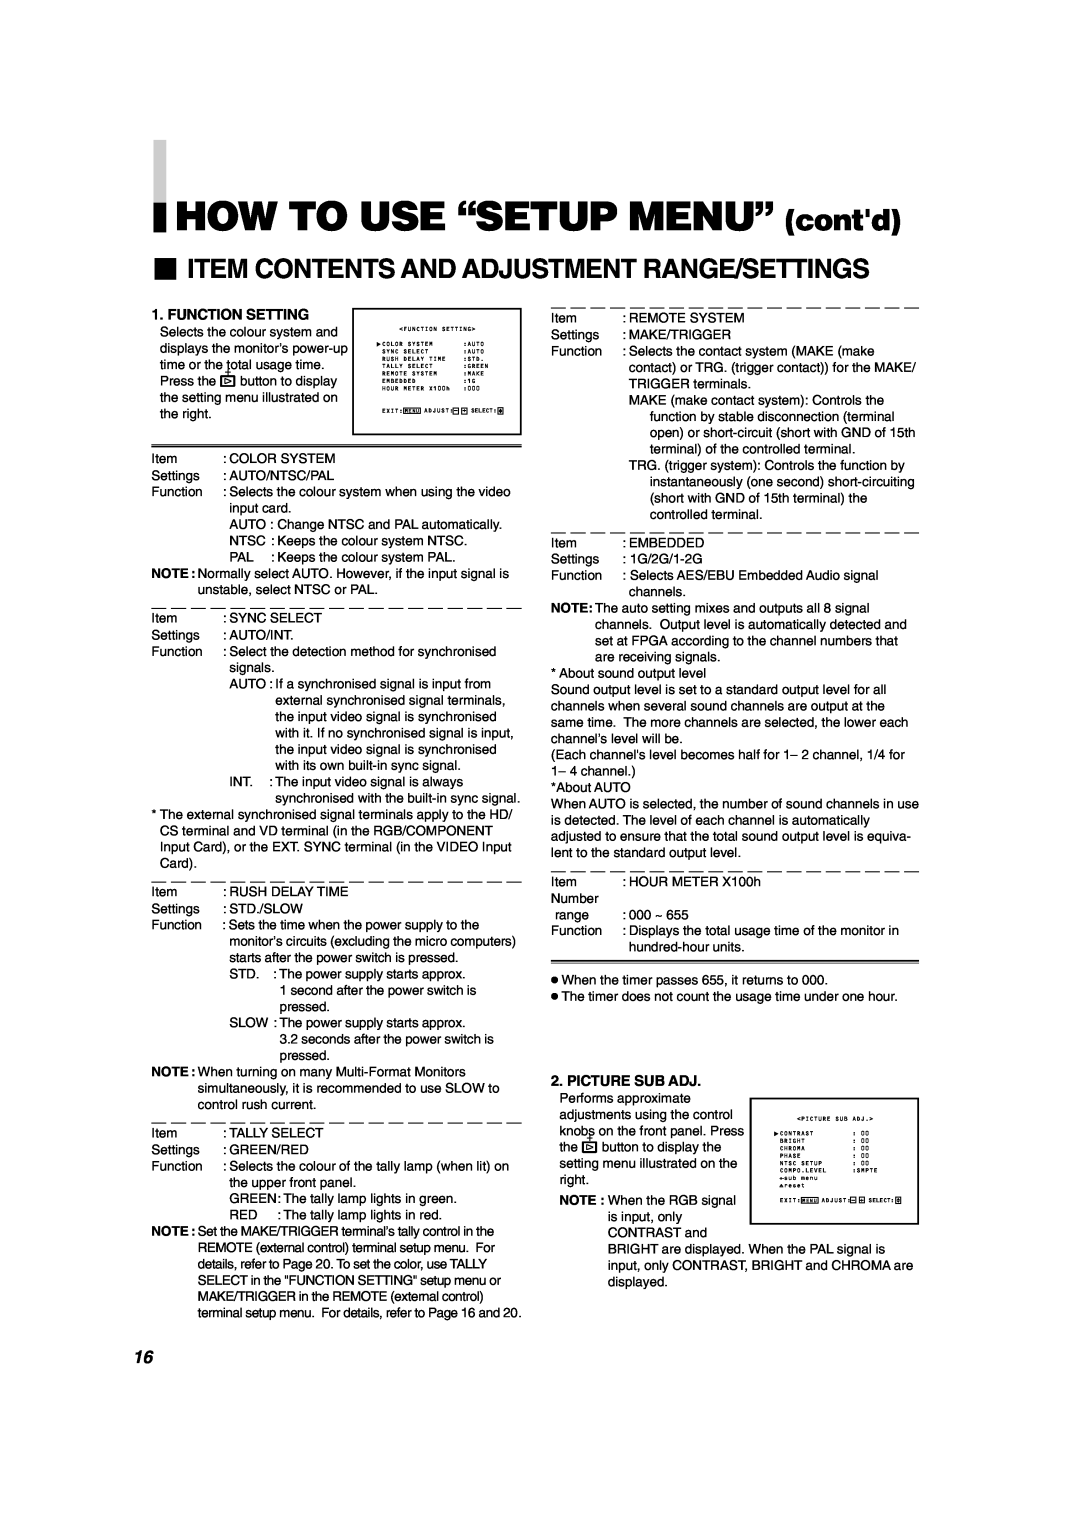 JVC DT-V1900CG manual HOW TO USE “SETUP MENU” contd,  Item Contents And Adjustment Range/Settings, Function Setting 